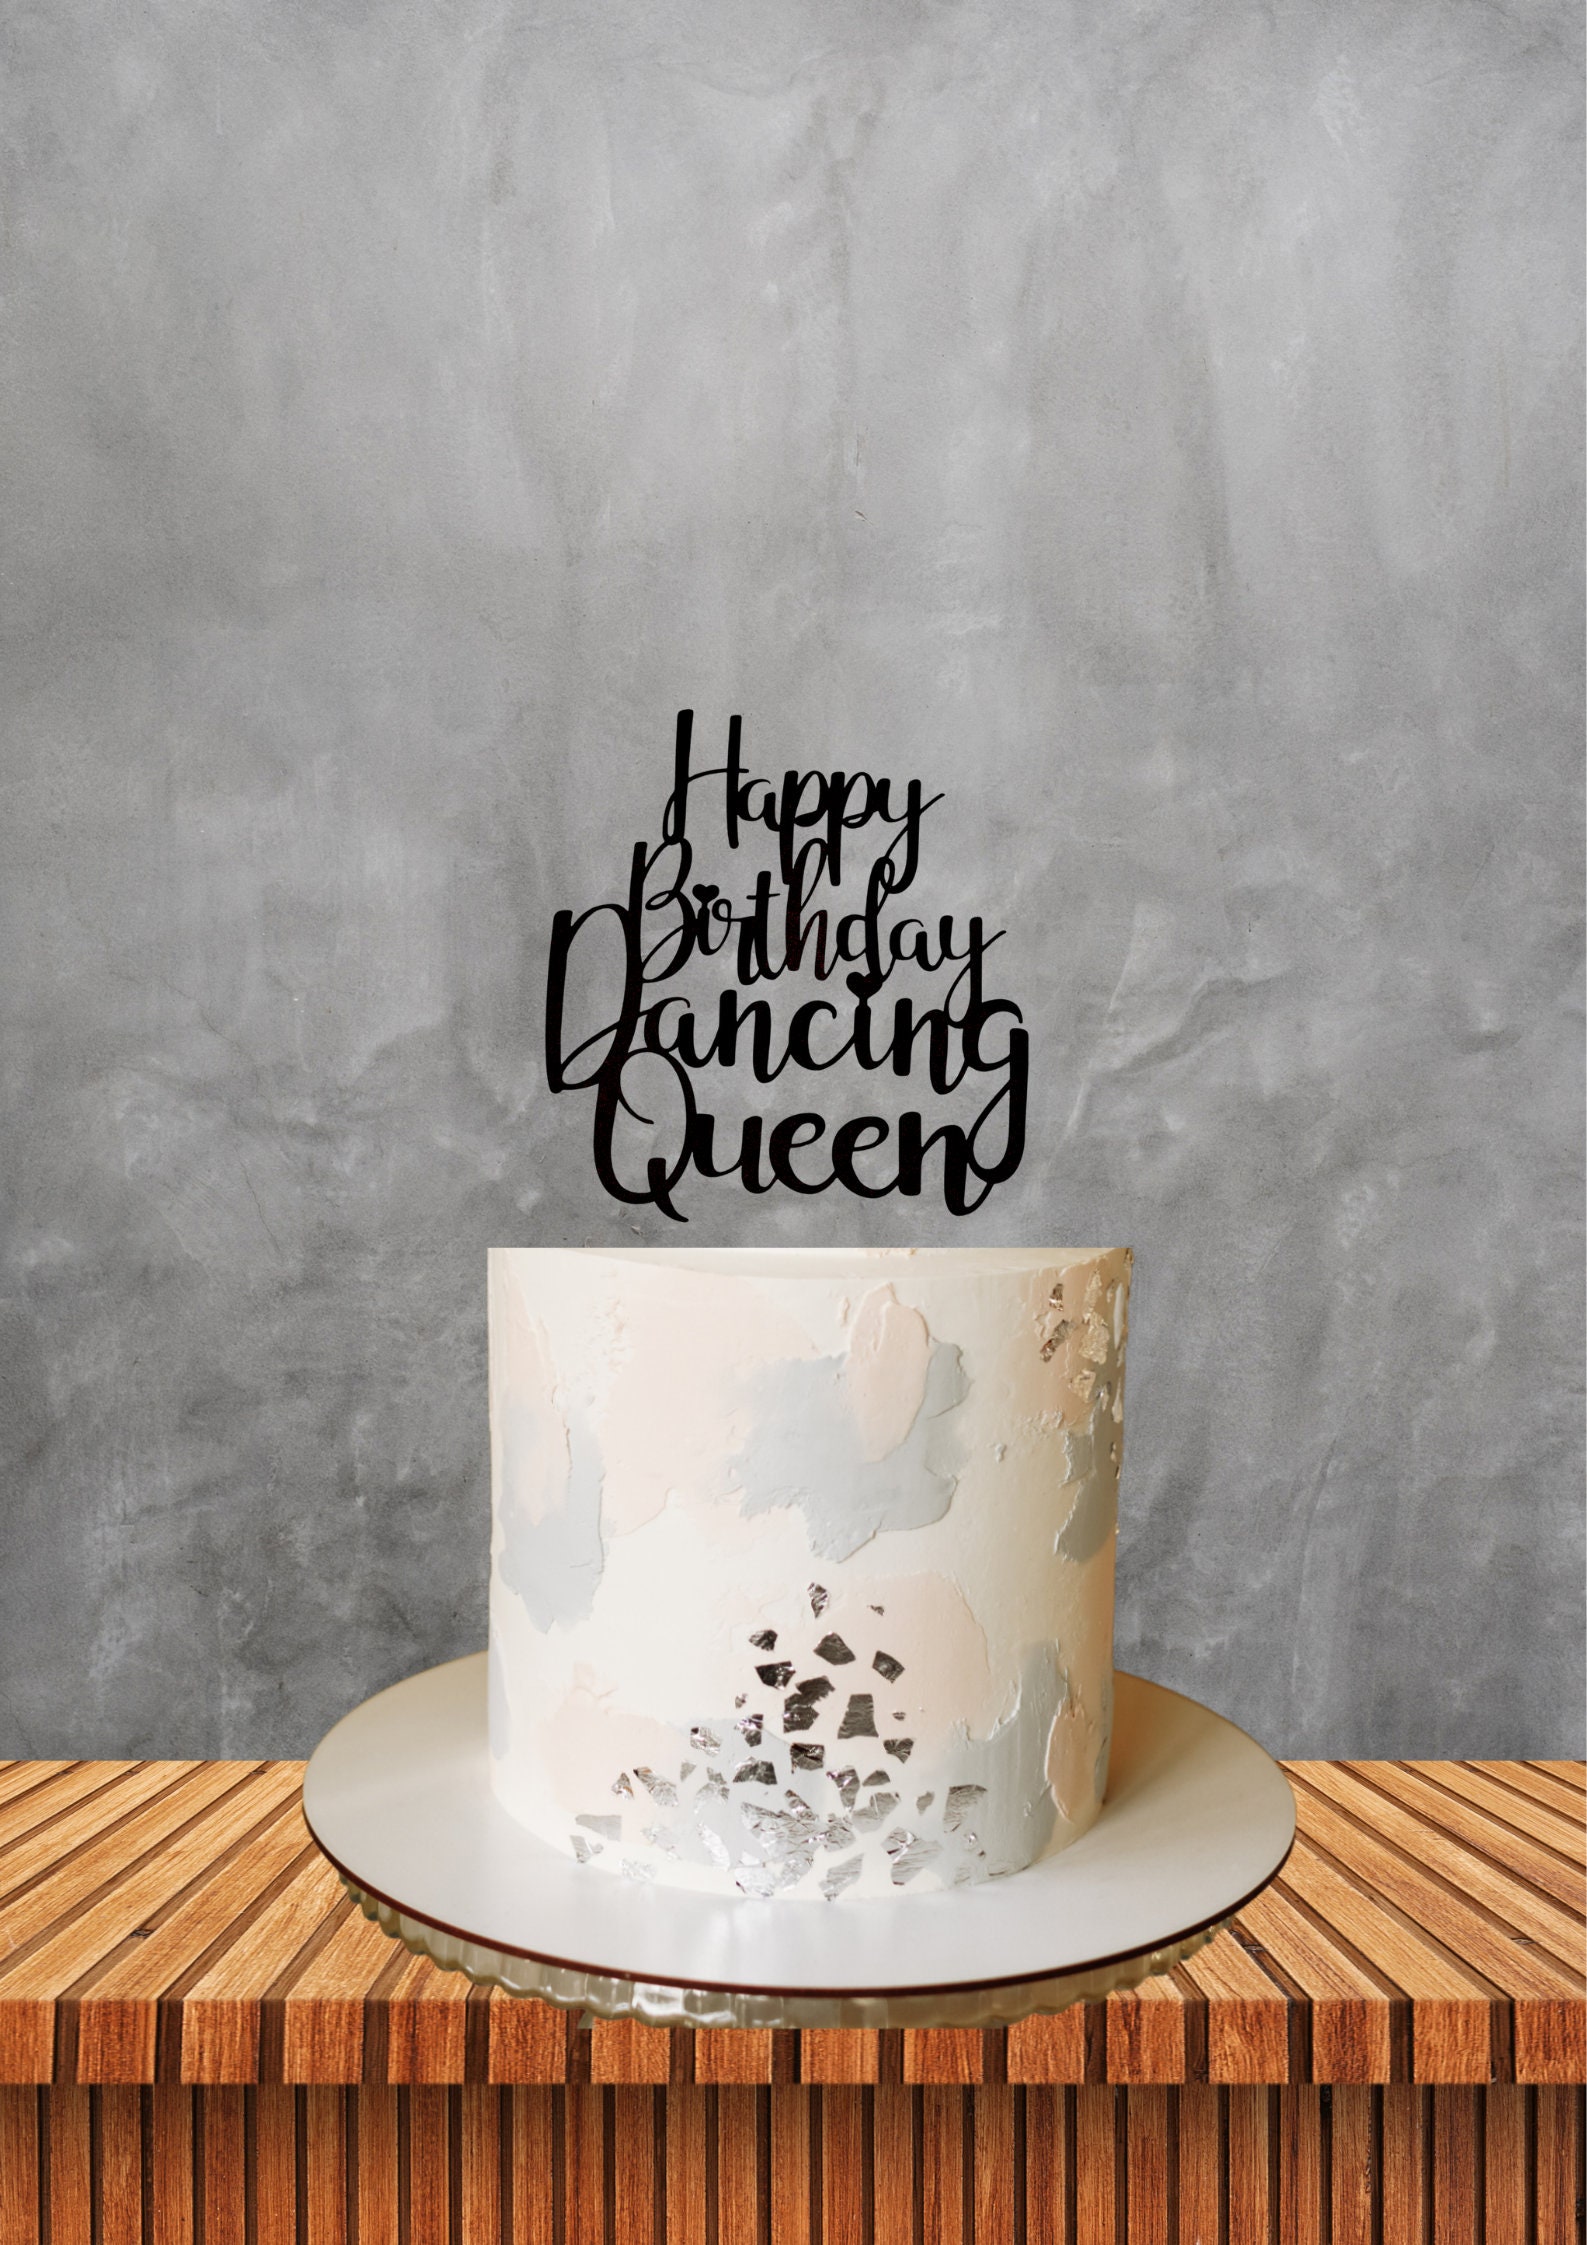 Trap Queen Cake [Explicit] – Baked by Bri